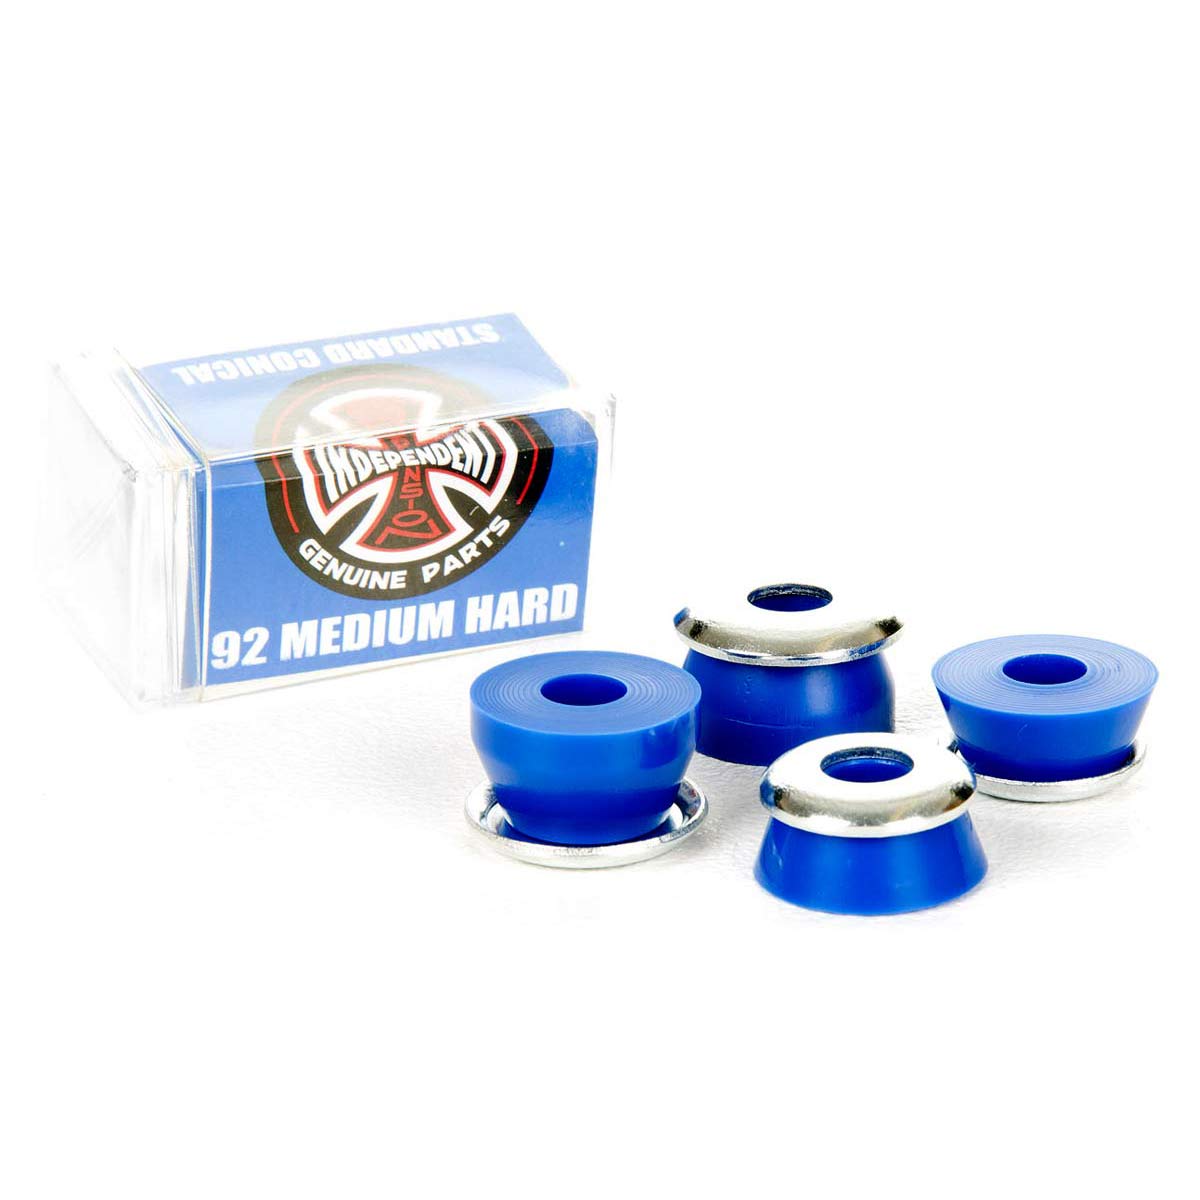 Independent Genuine Parts Standard Conical Bushings 92a